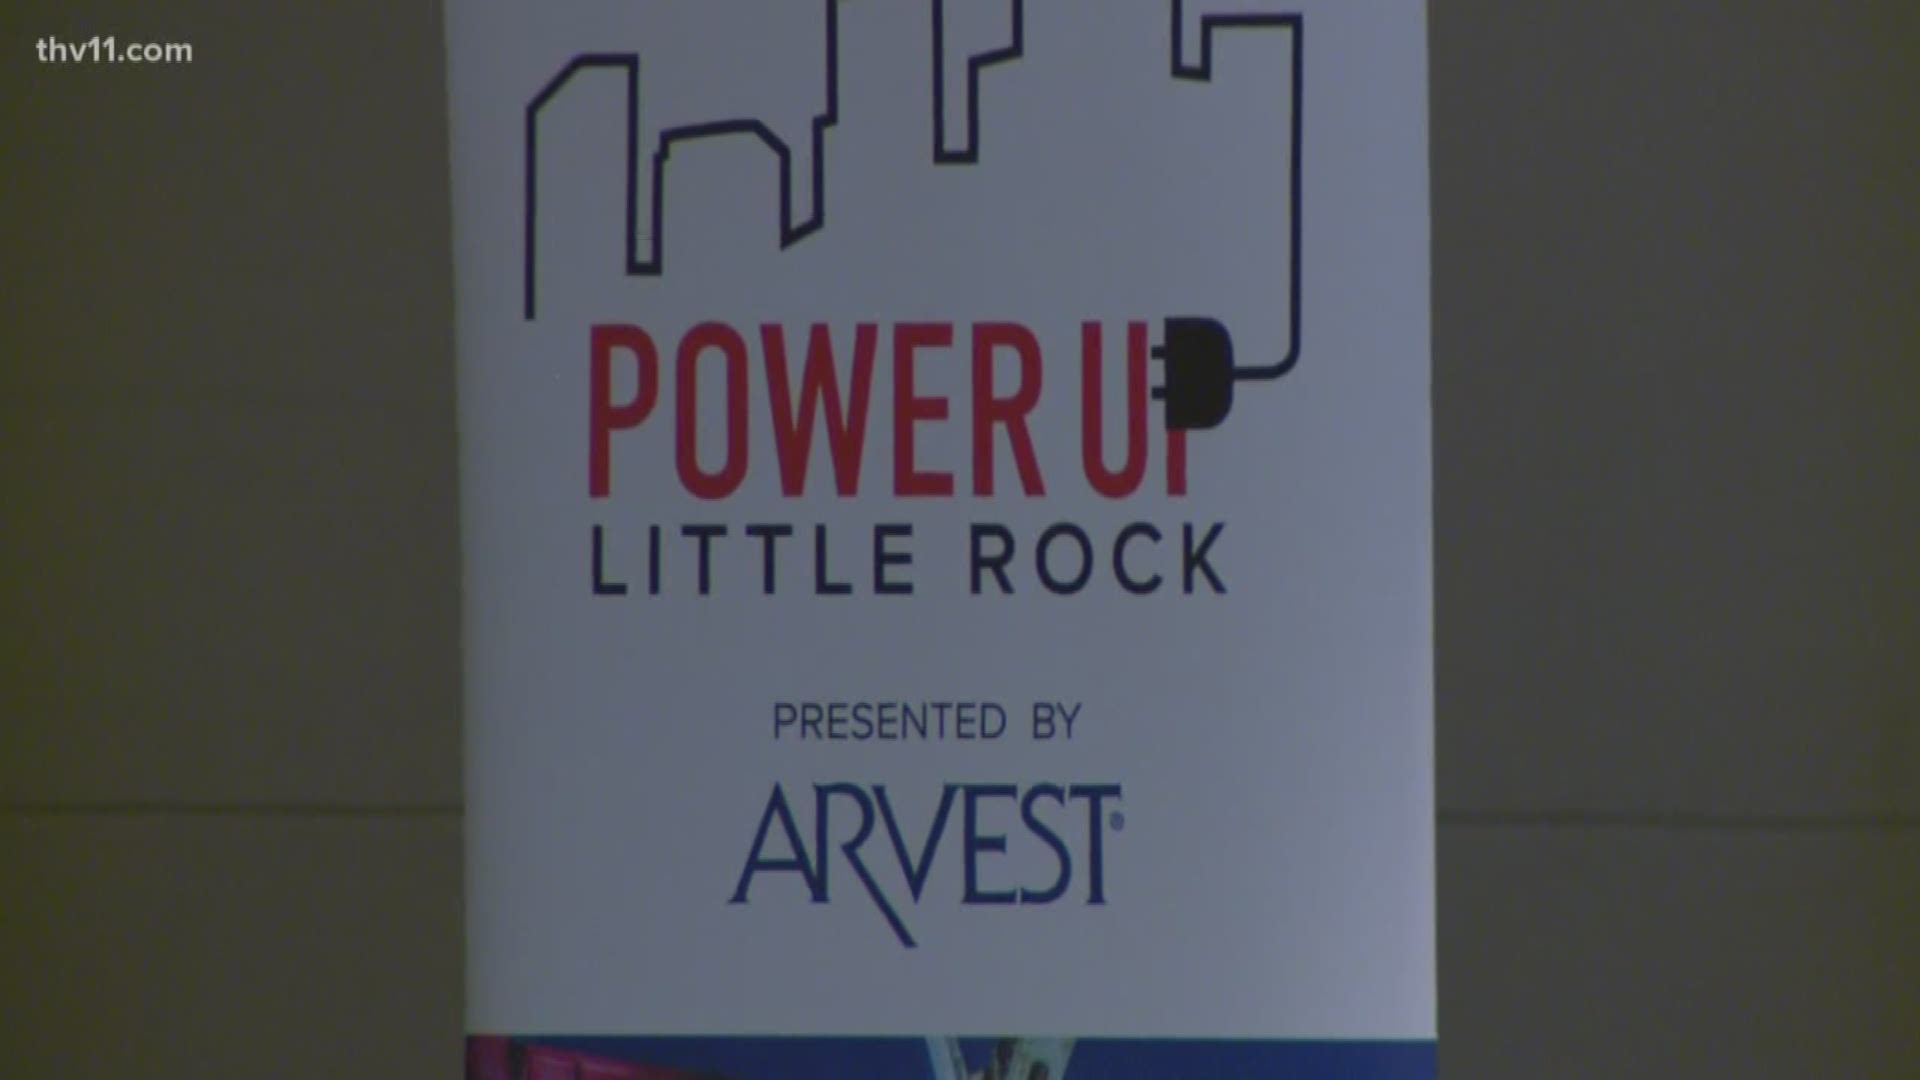 The Little Rock Chamber of Commerce held a panel discussion today called 'Power Up Little Rock.'